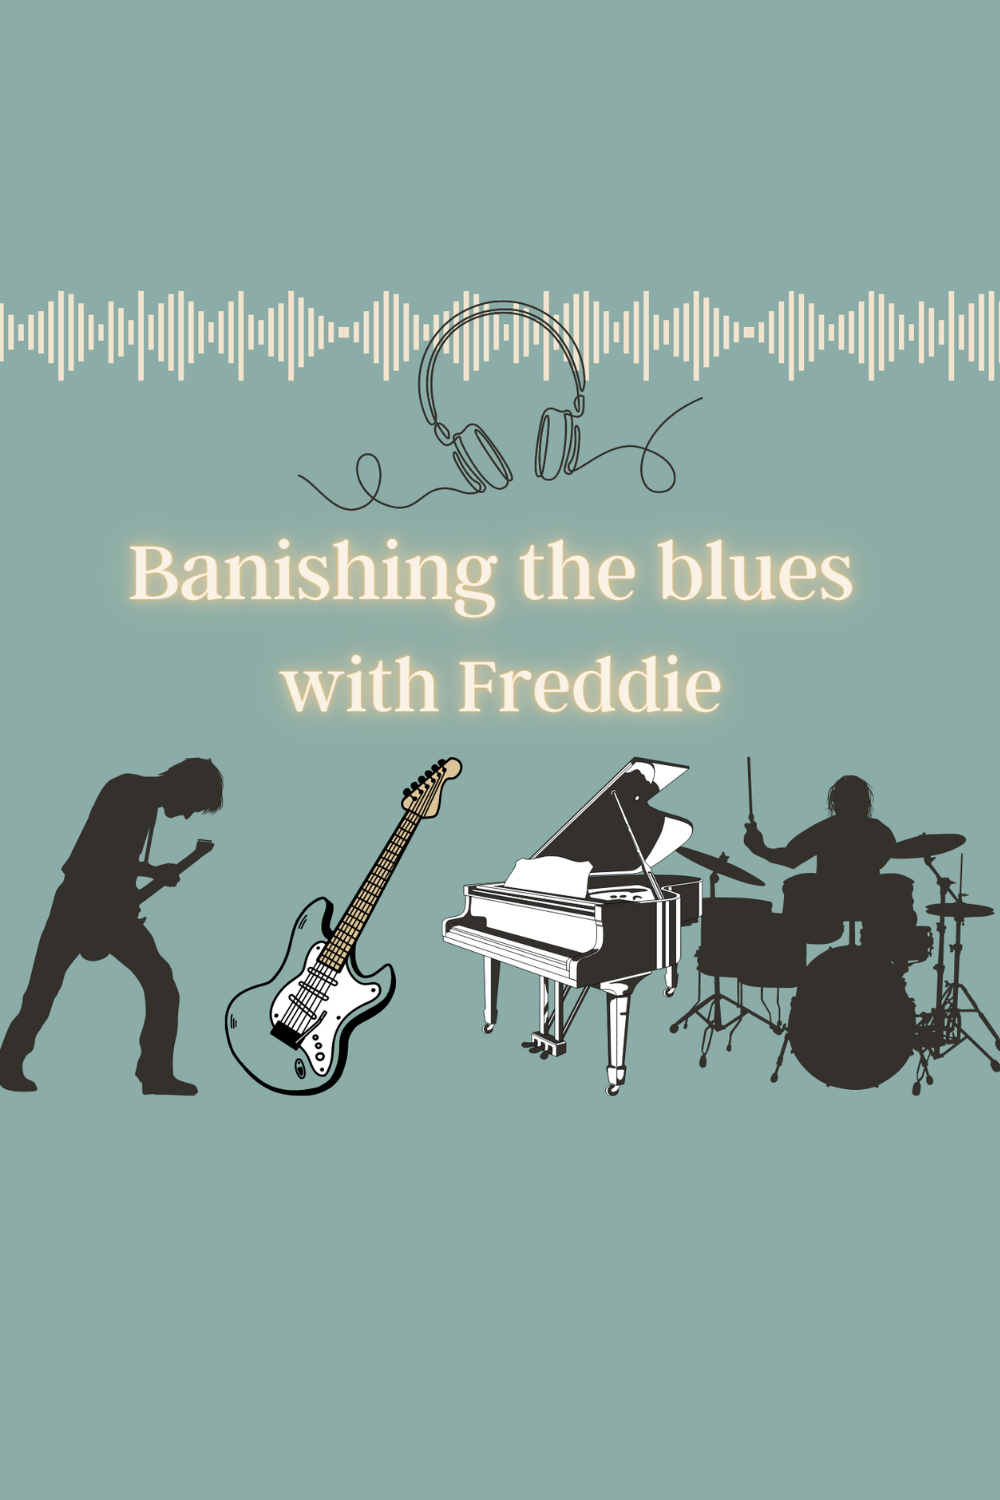 Banishing the blues with Freddie - watching the movie helped me to unshackle my perimenopause fears. Find out what works for you.